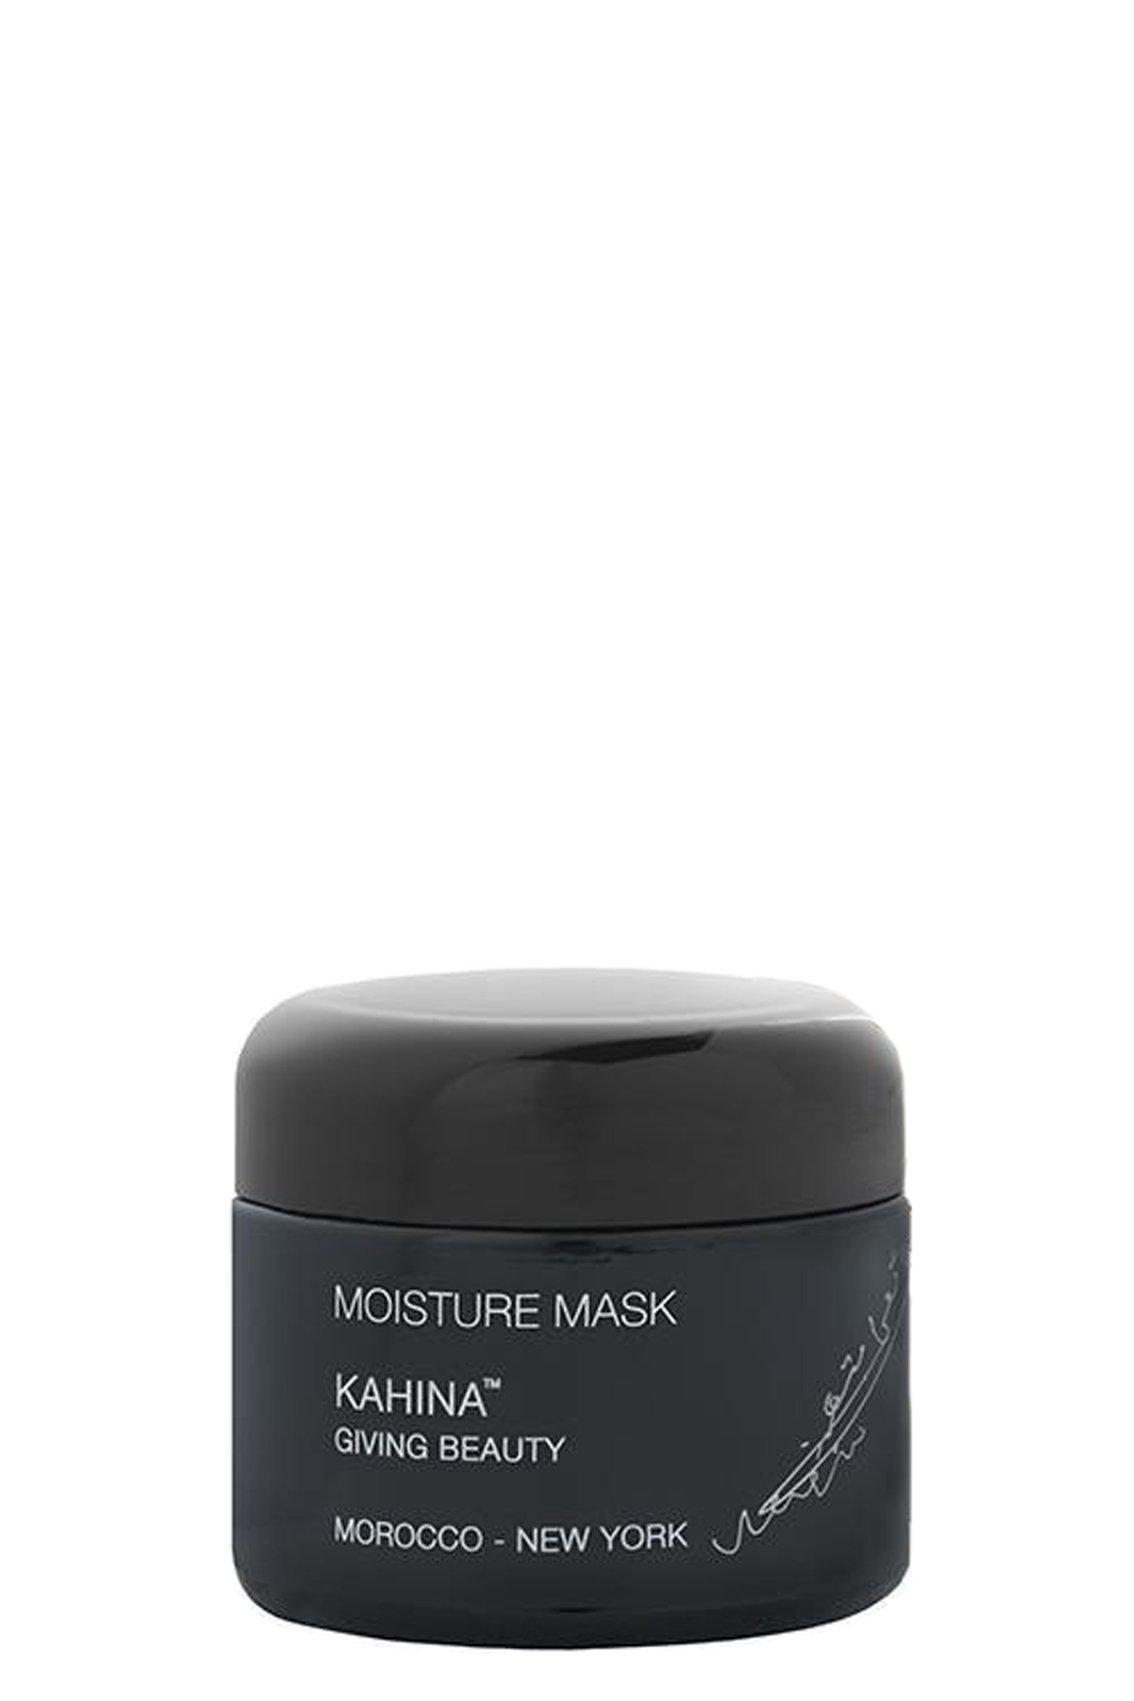 Indisponible : Moisture Mask - Masque Hydratant Unavailable: Moisture Mask - Hydrating Mask - Kahina Giving Beauty